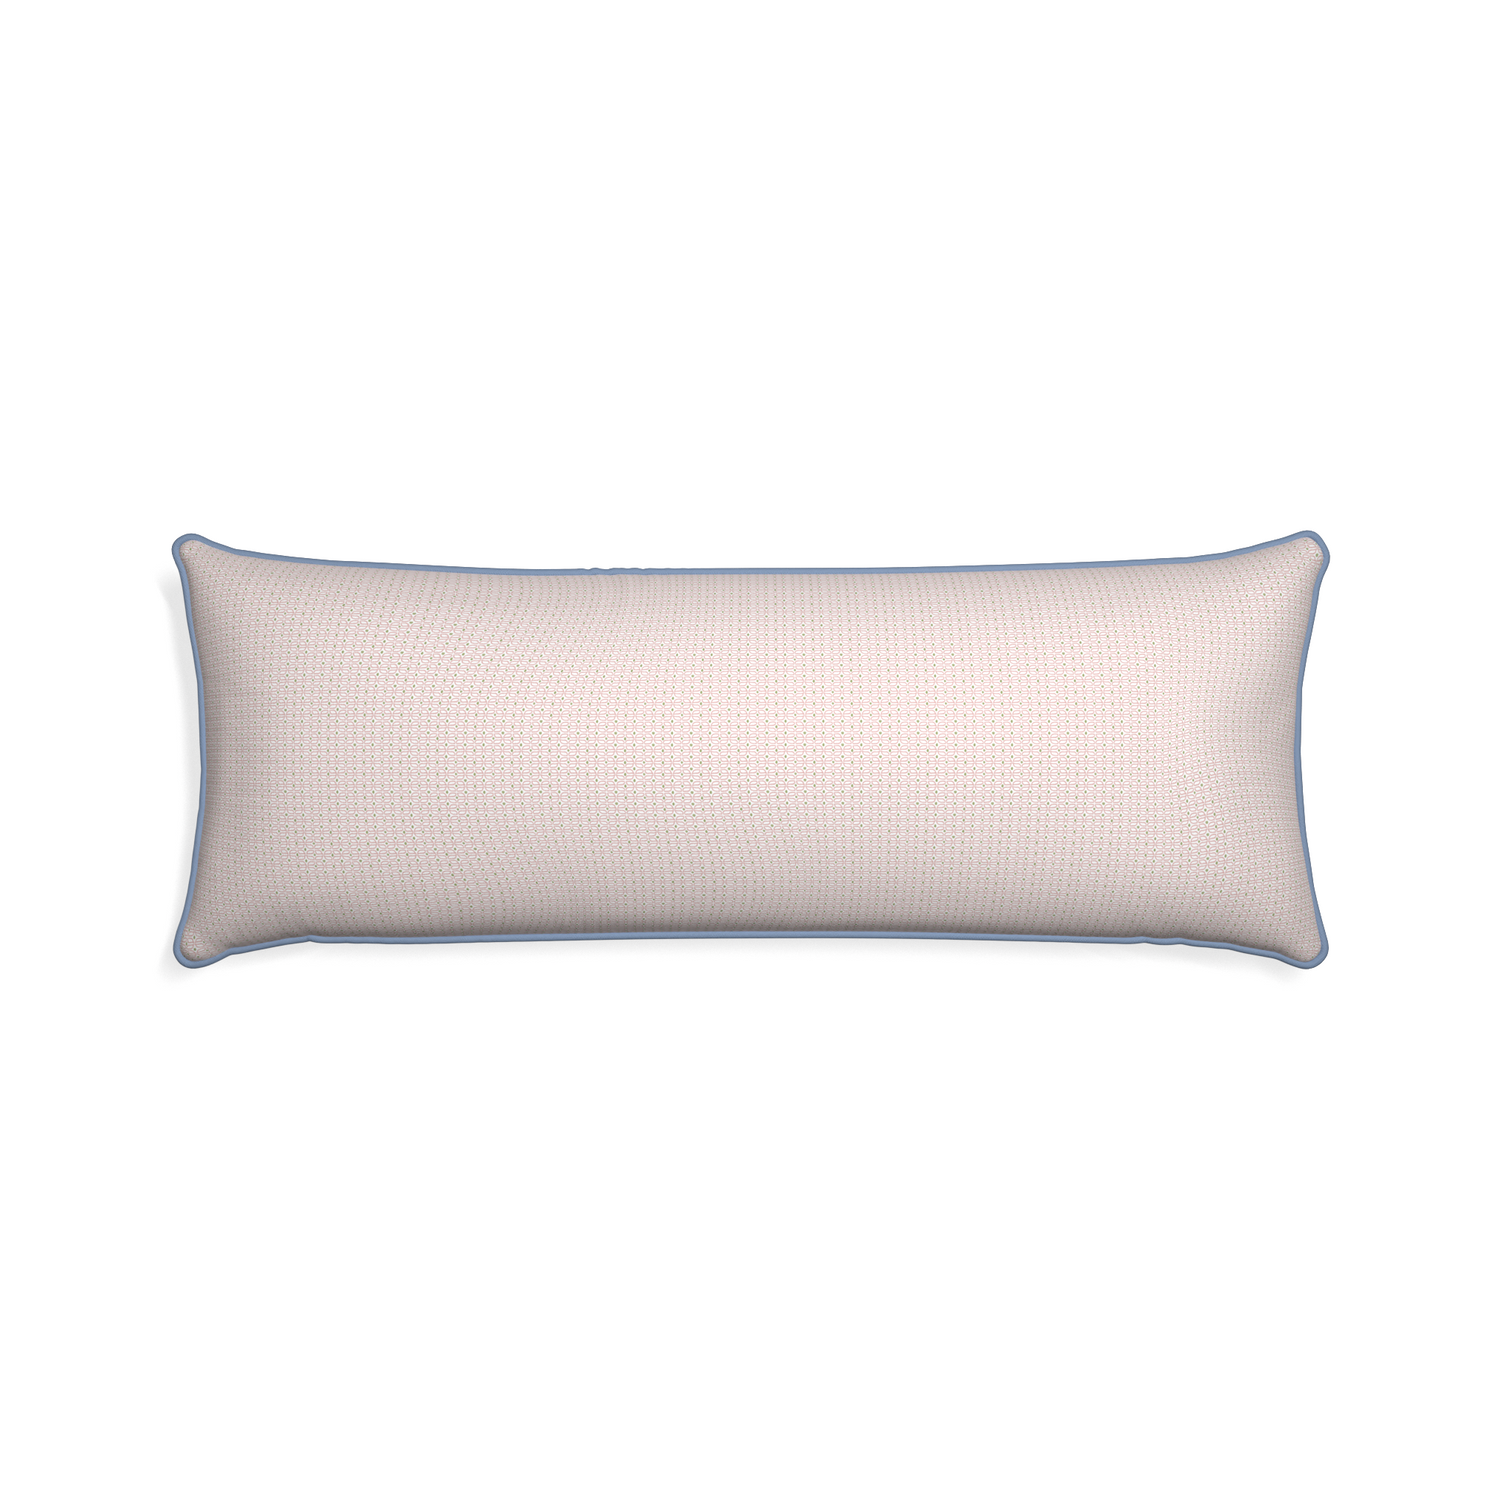 Xl-lumbar loomi pink custom pillow with sky piping on white background